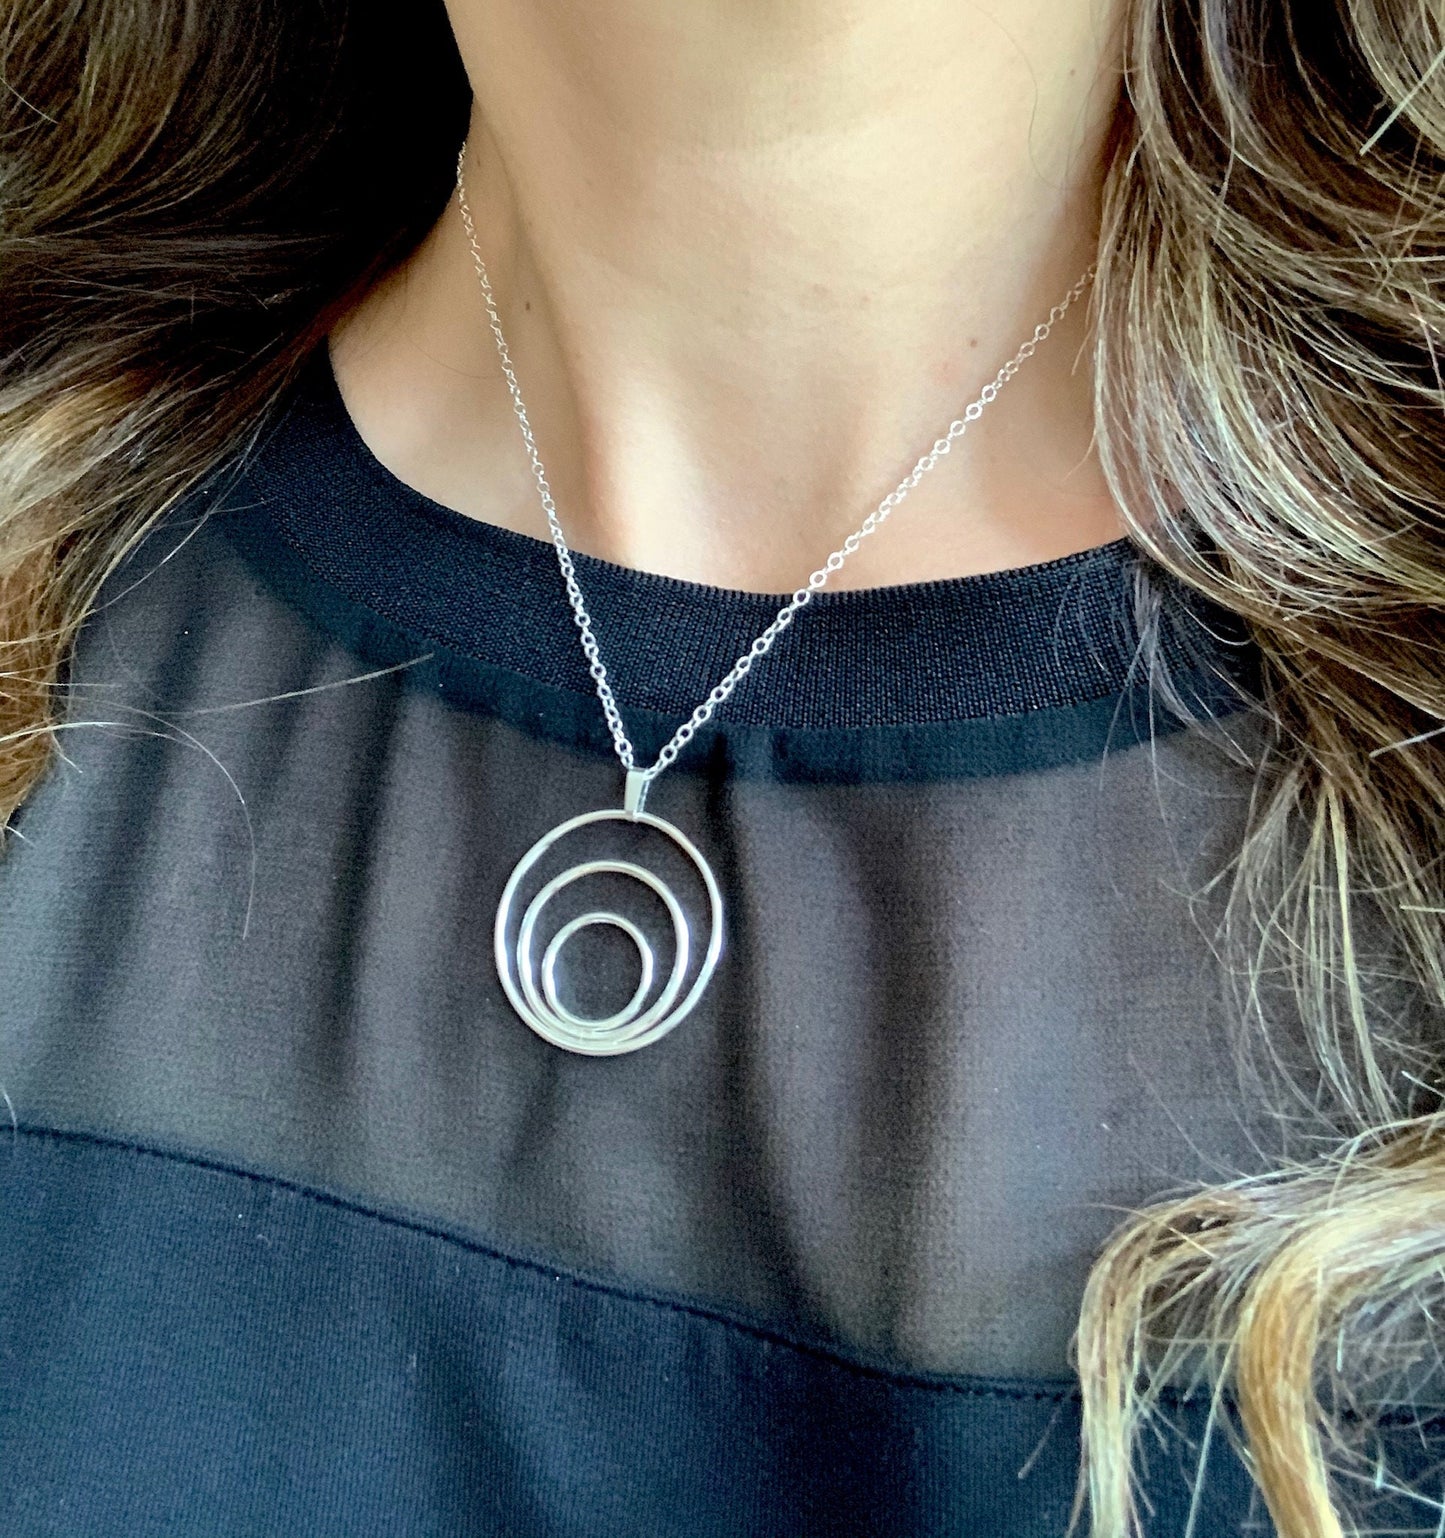 Silver three circles necklace, large silver circle necklace